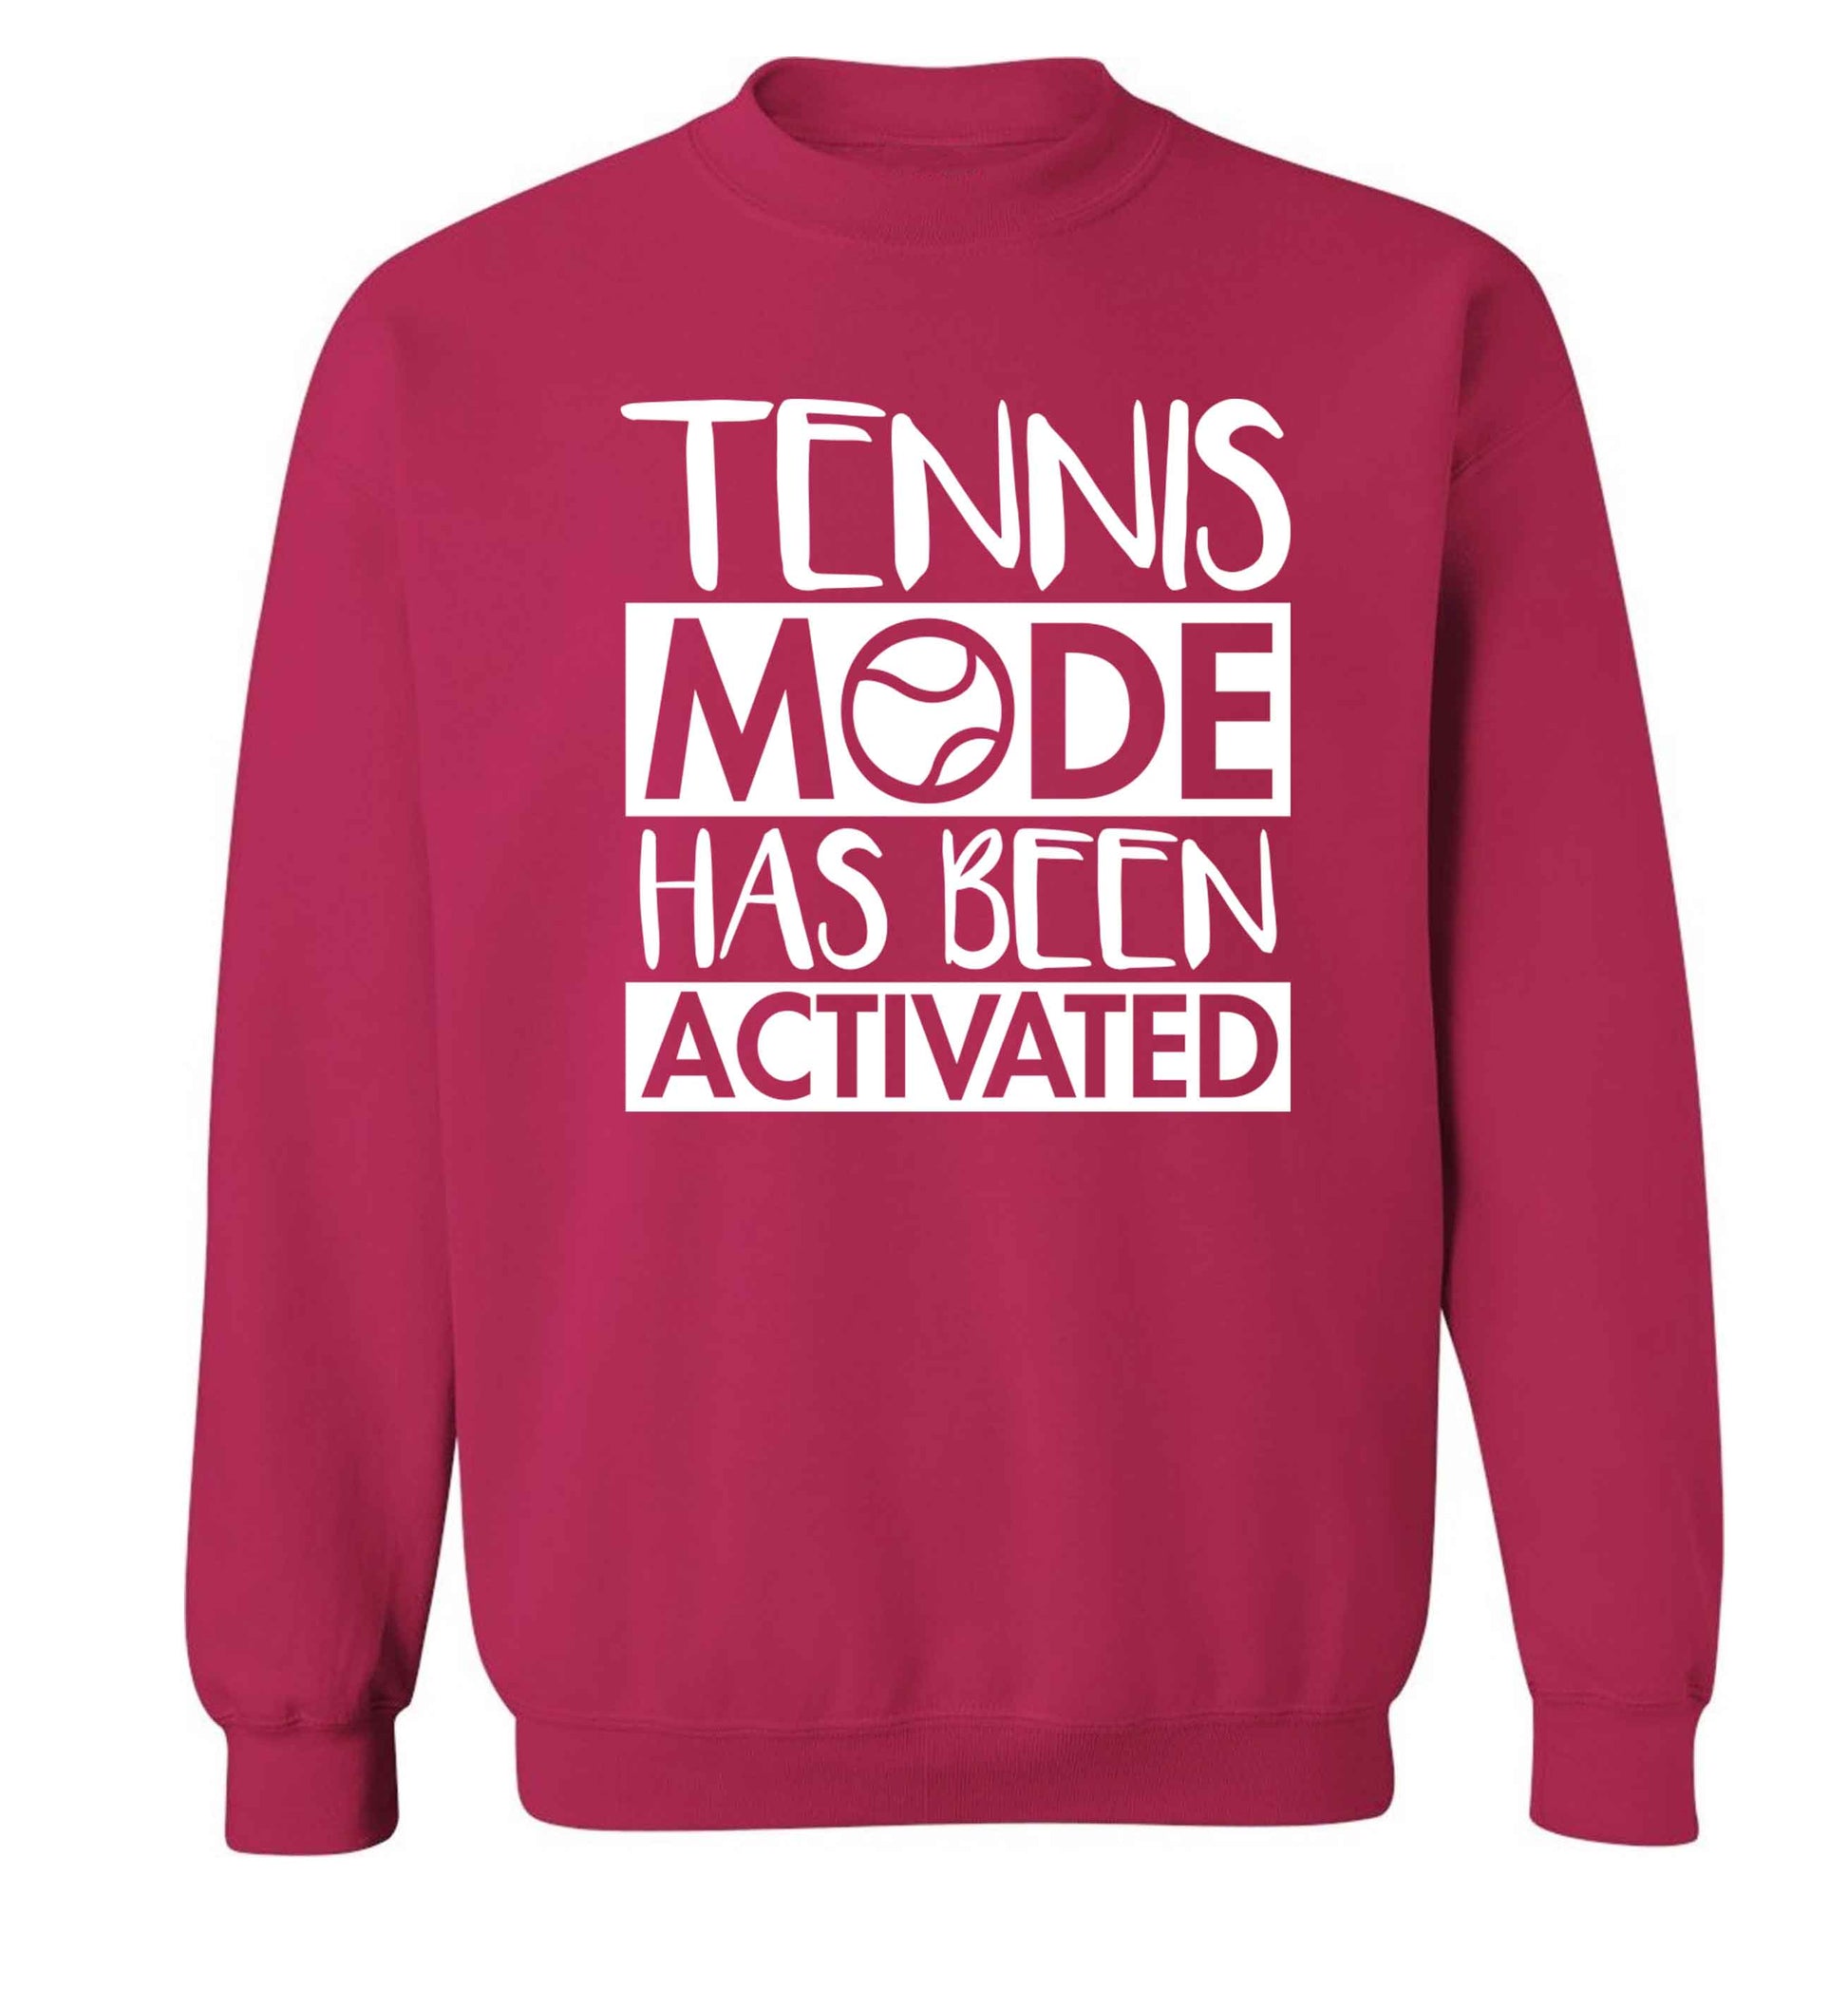 Tennis mode has been activated Adult's unisex pink Sweater 2XL